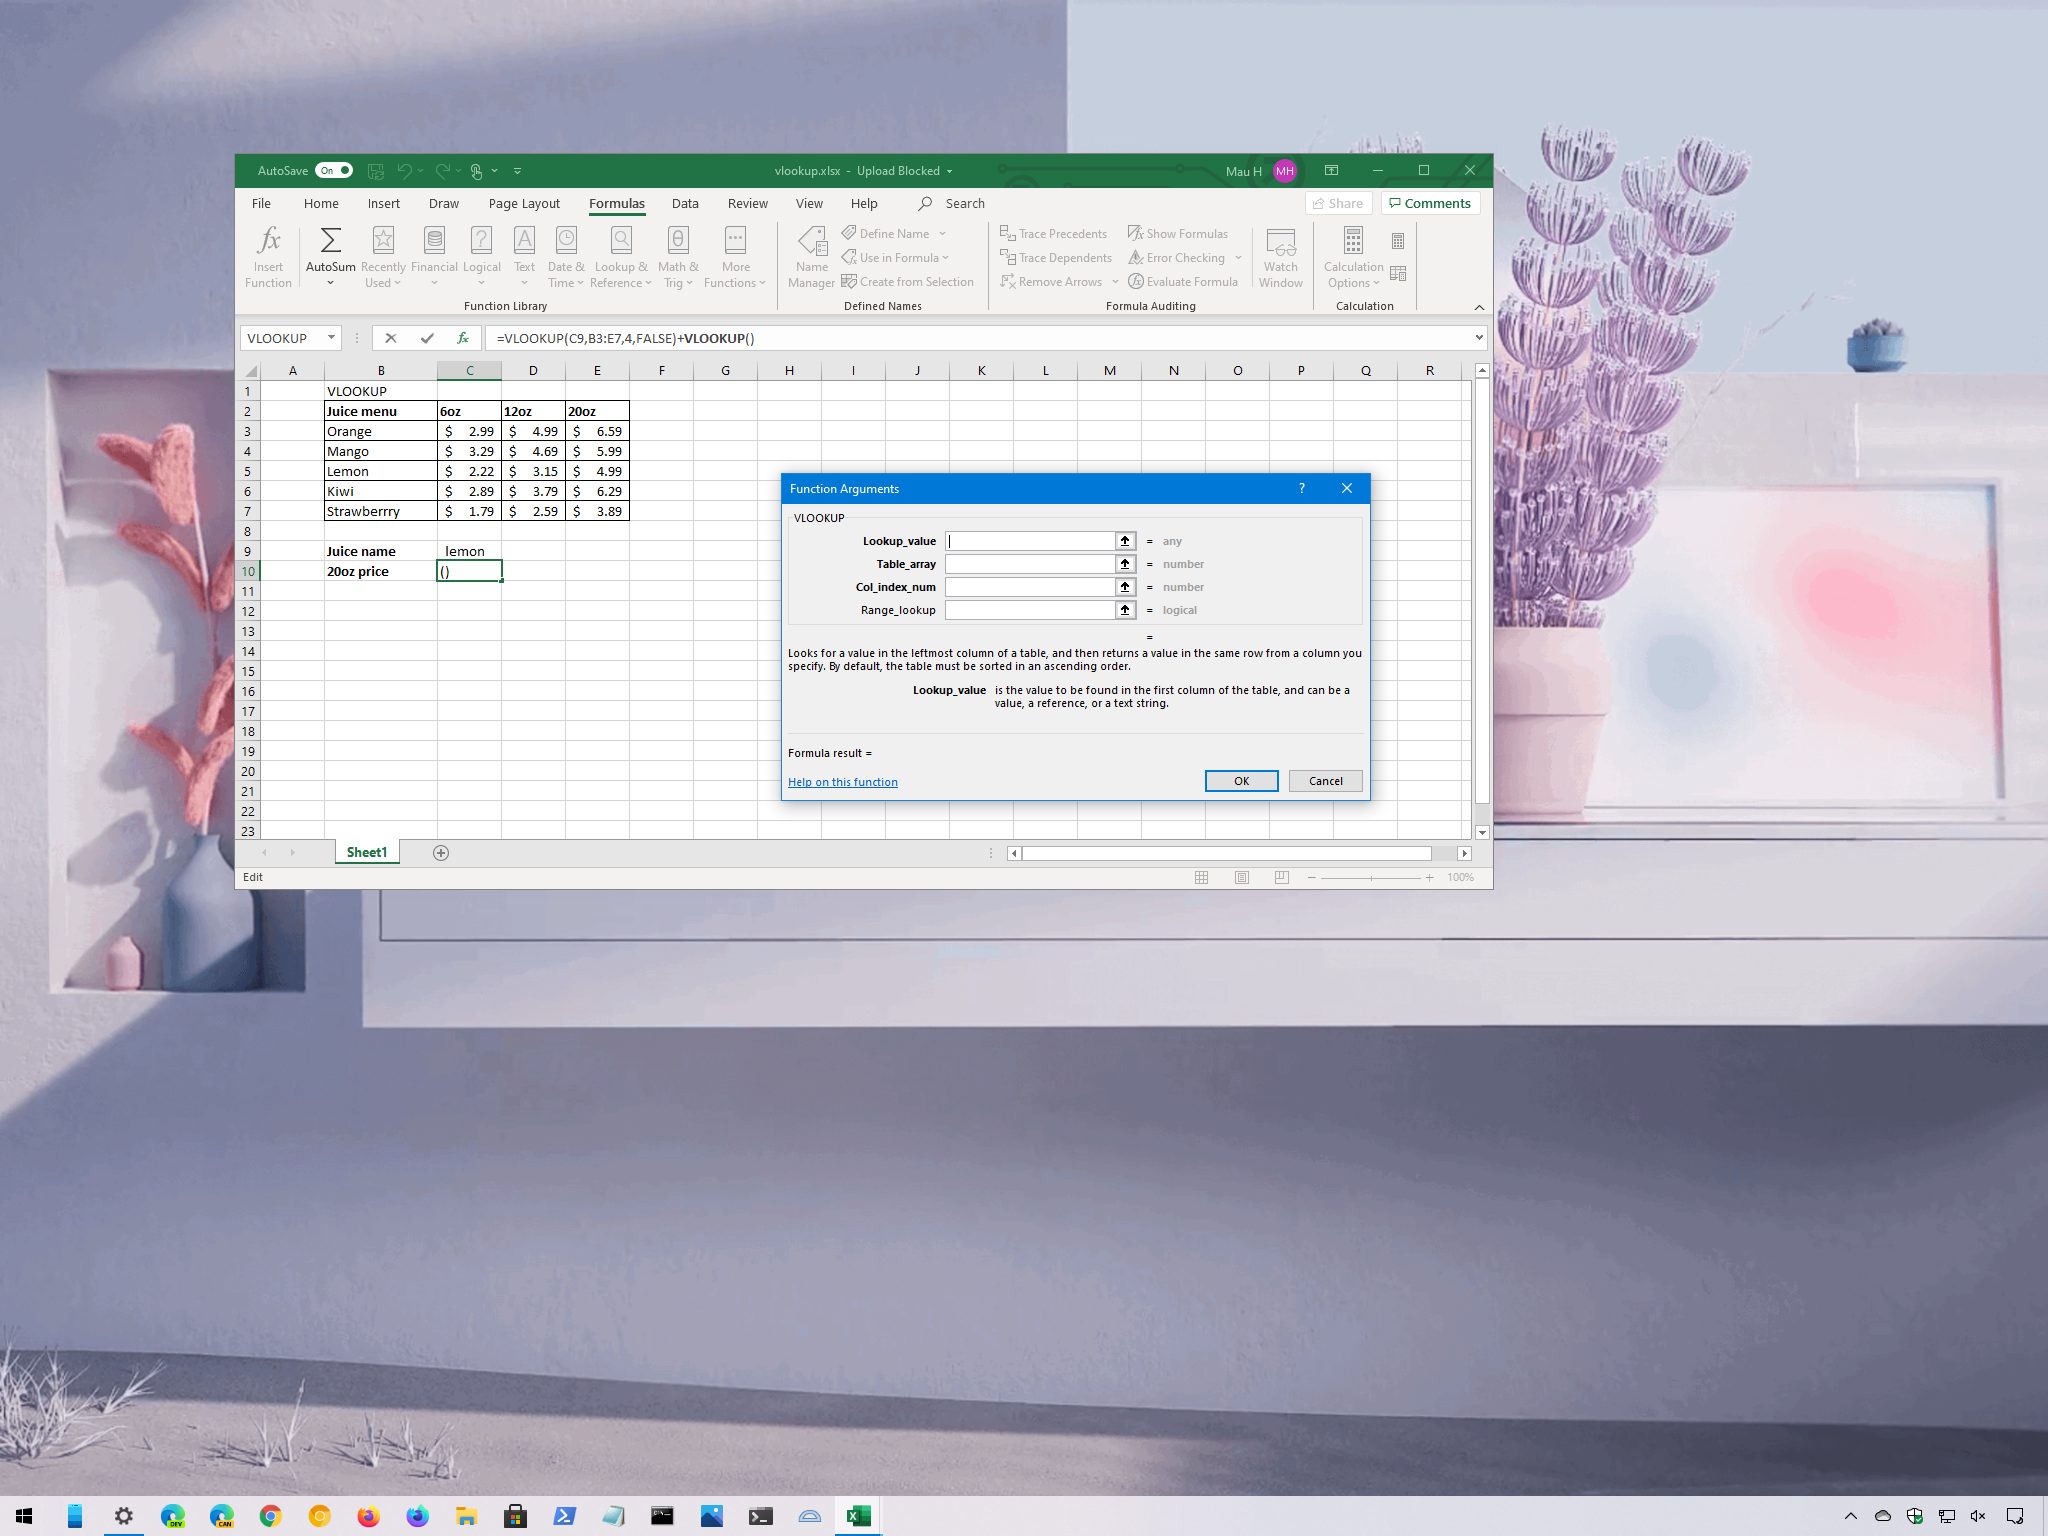 How to use VLOOKUP in Microsoft Excel  Windows Central